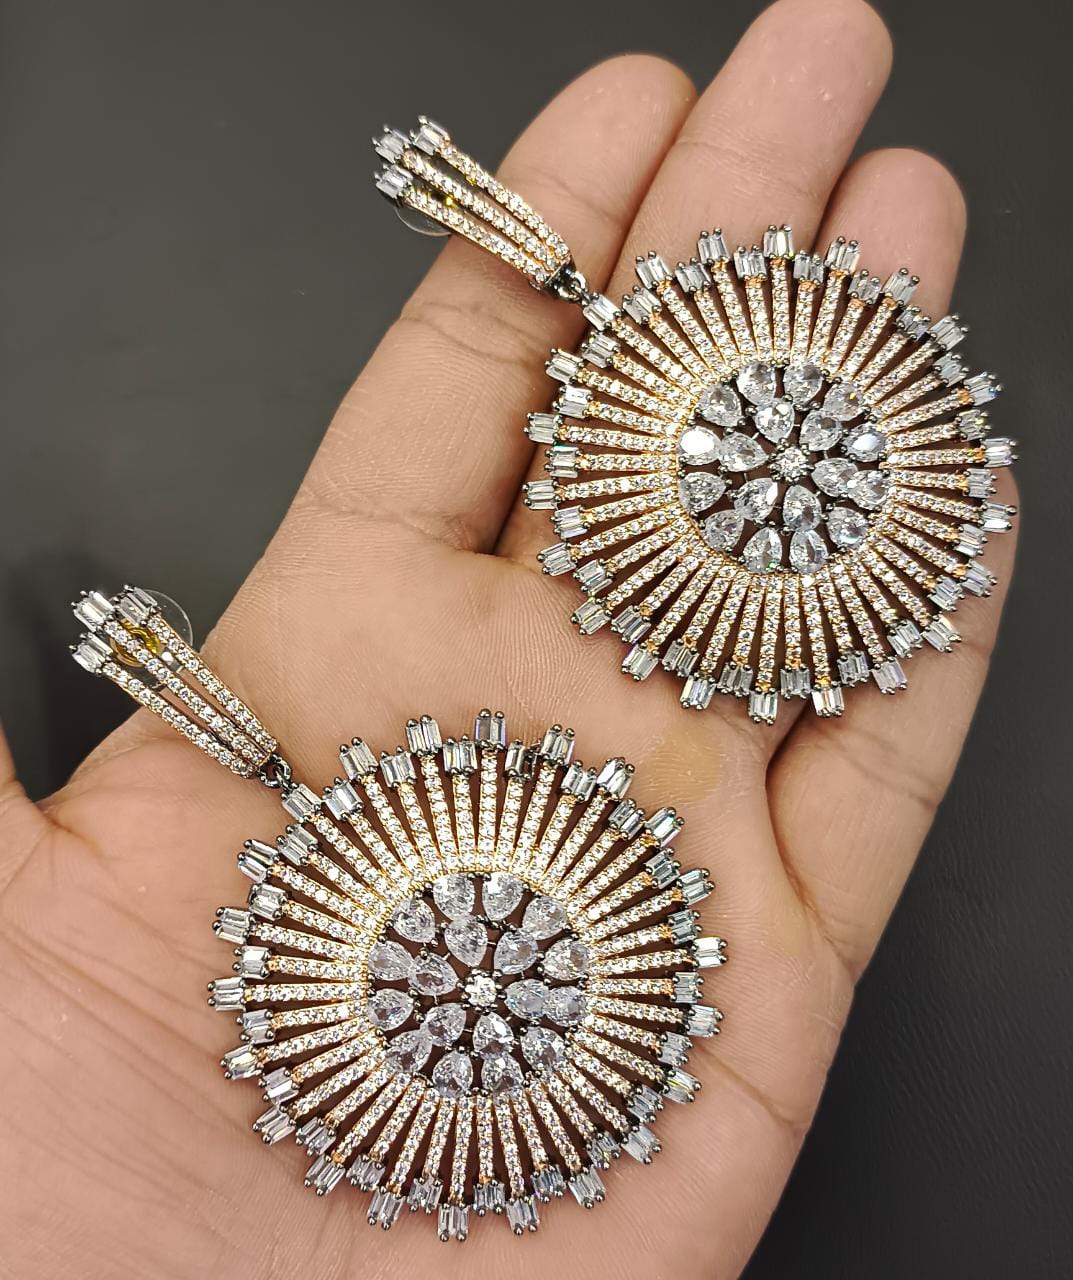 GET BEAUTIFUL ROUND Antique CRYSTAL EARRINGS